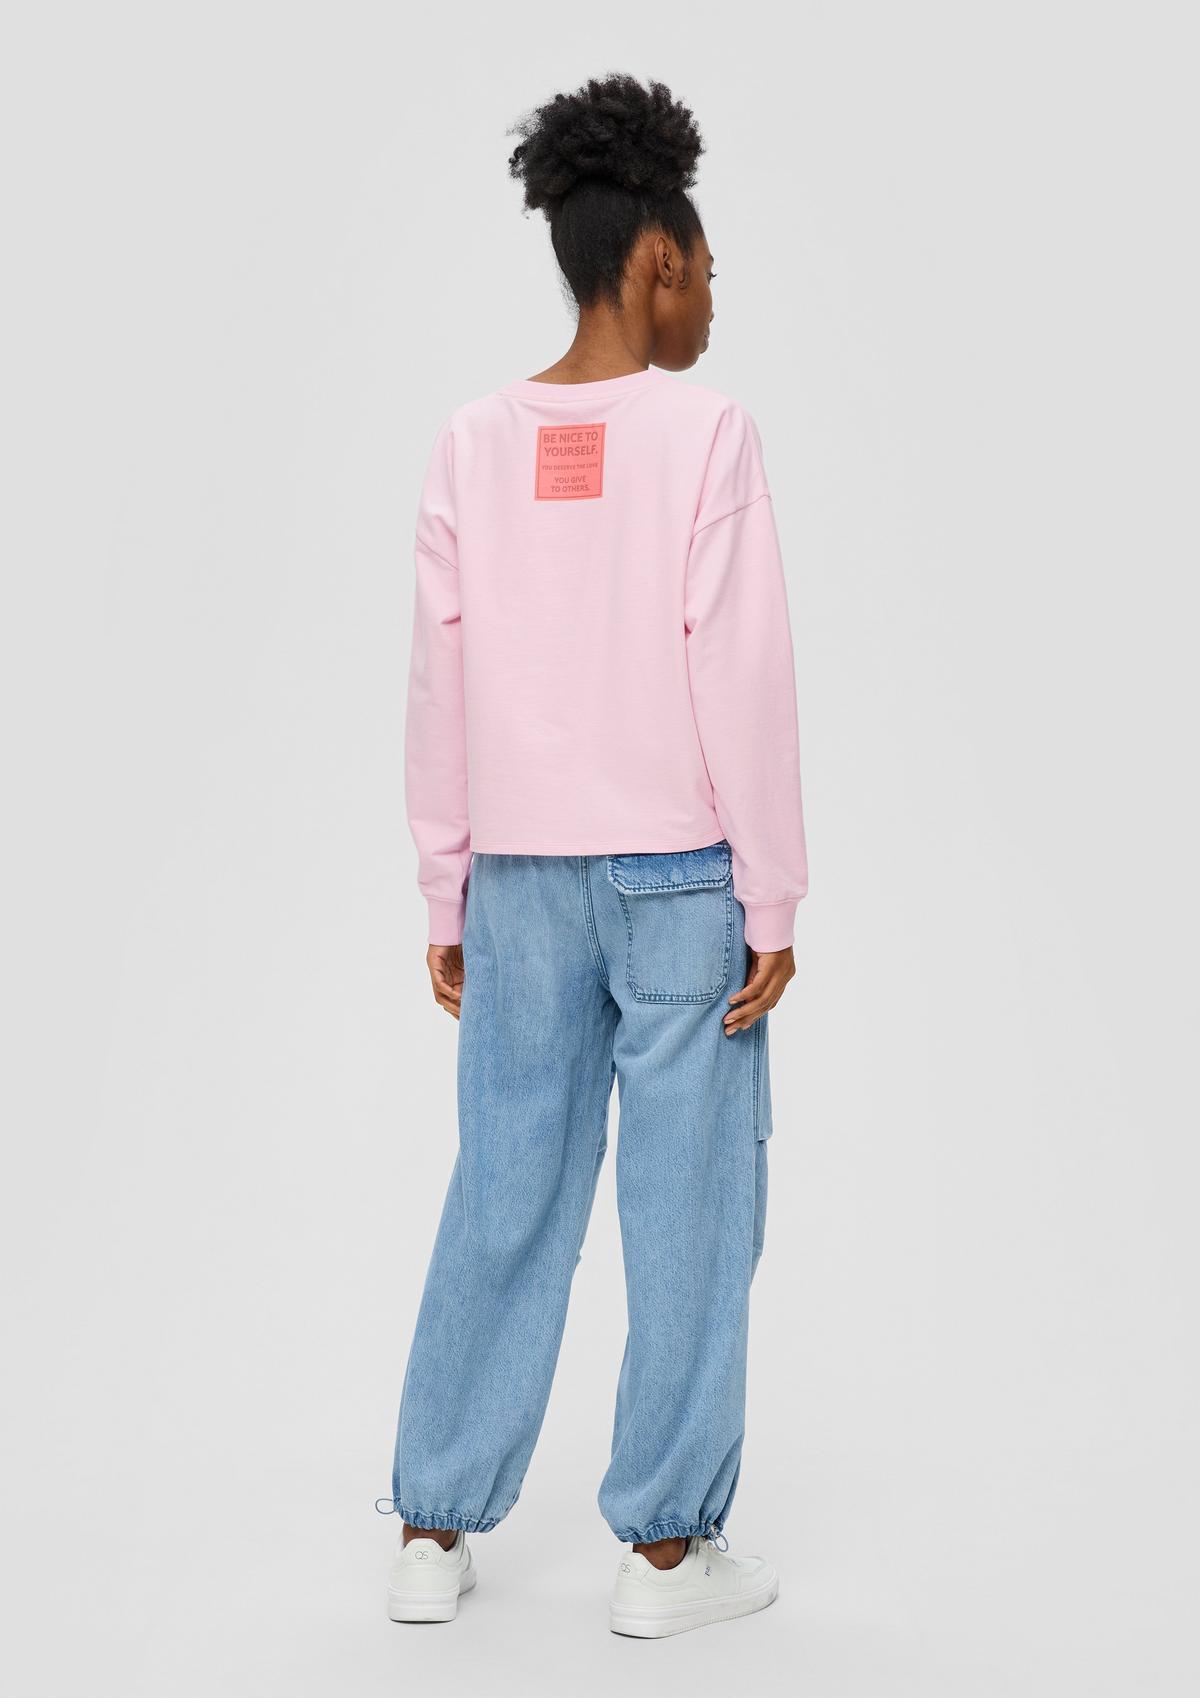 s.Oliver Sweatshirt in a boxy cut with a back print